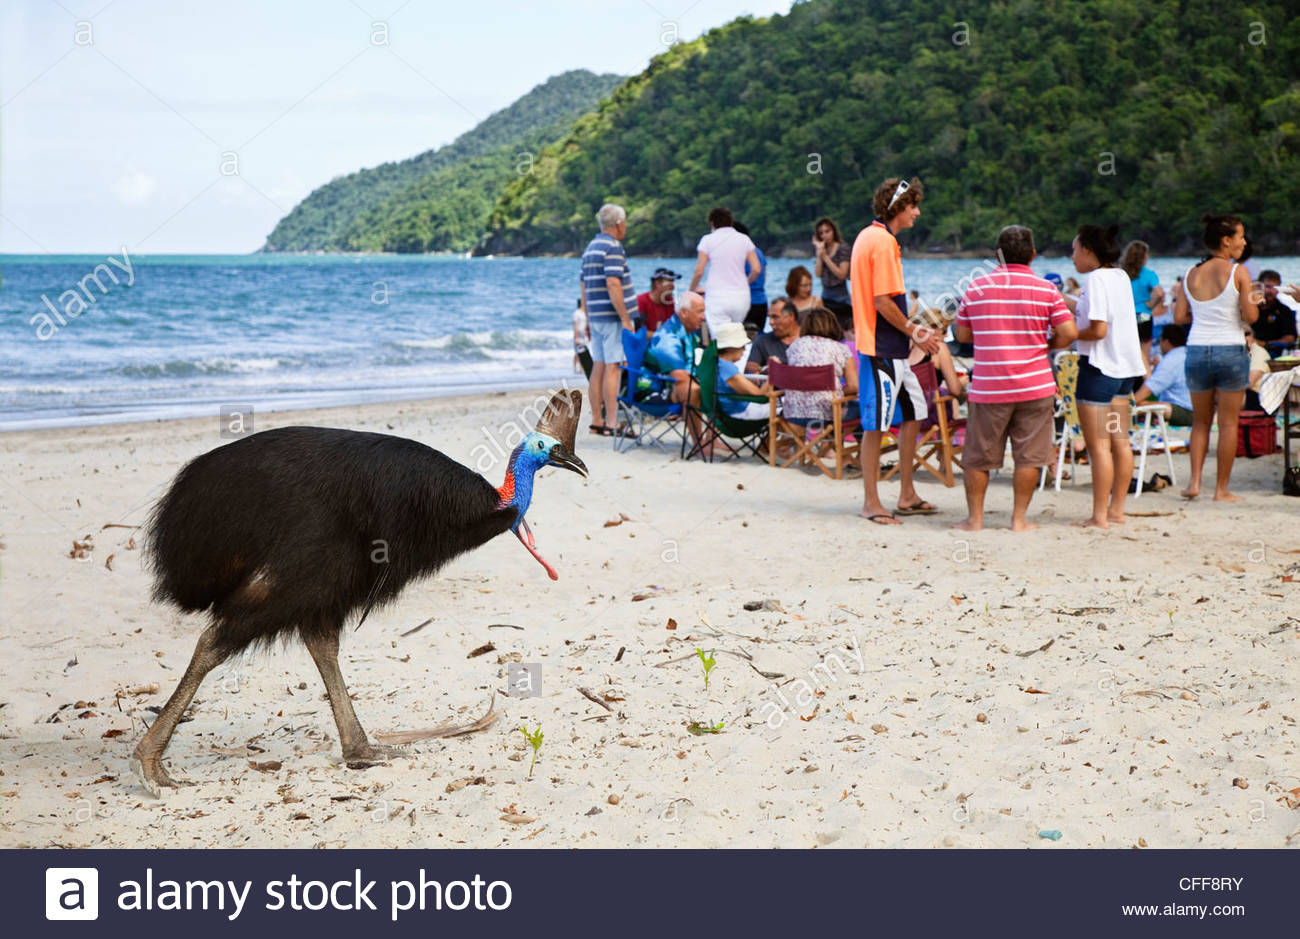 Image result for southern cassowary on beach